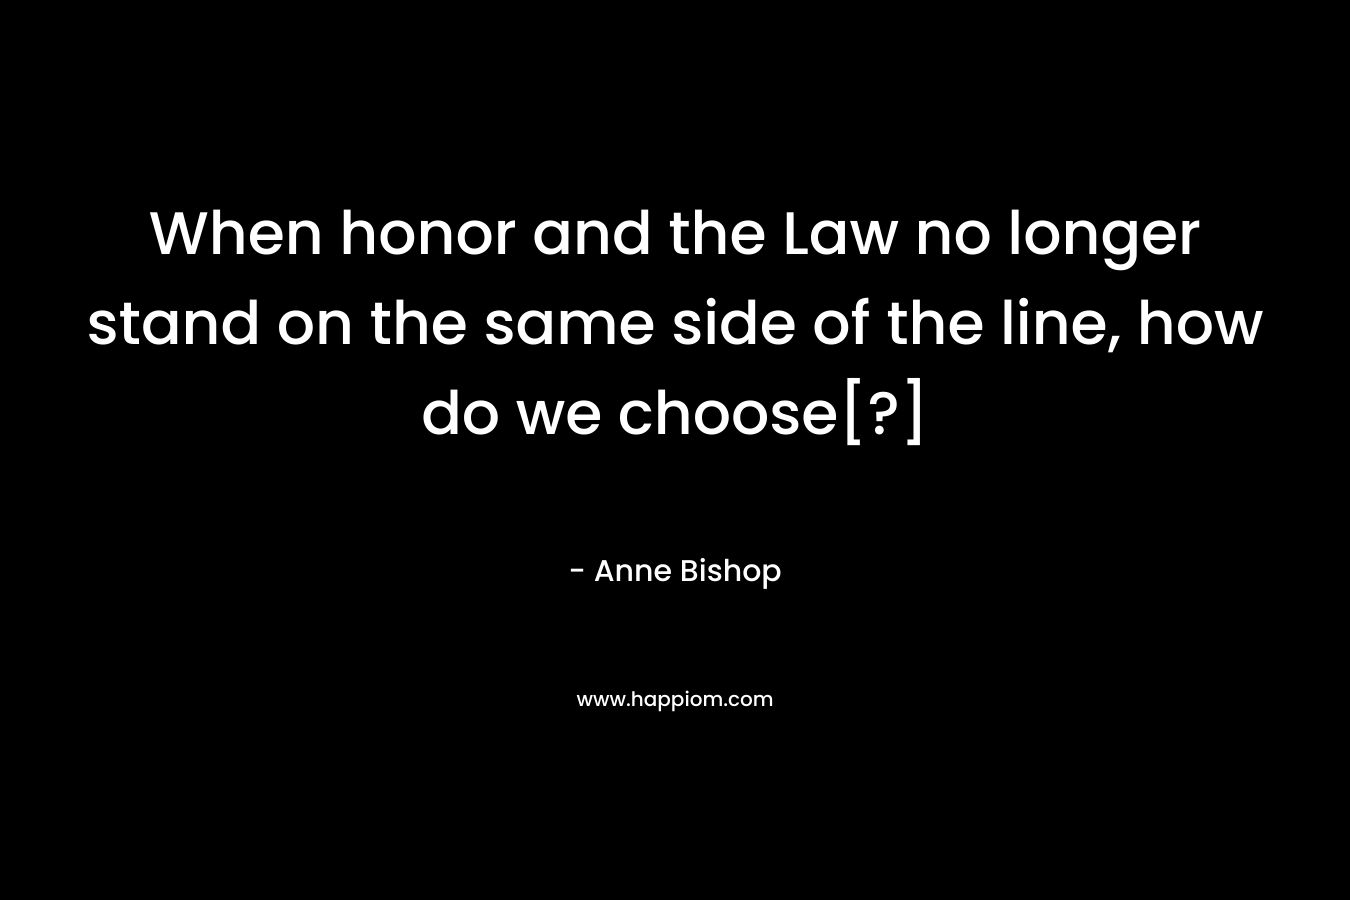 When honor and the Law no longer stand on the same side of the line, how do we choose[?]